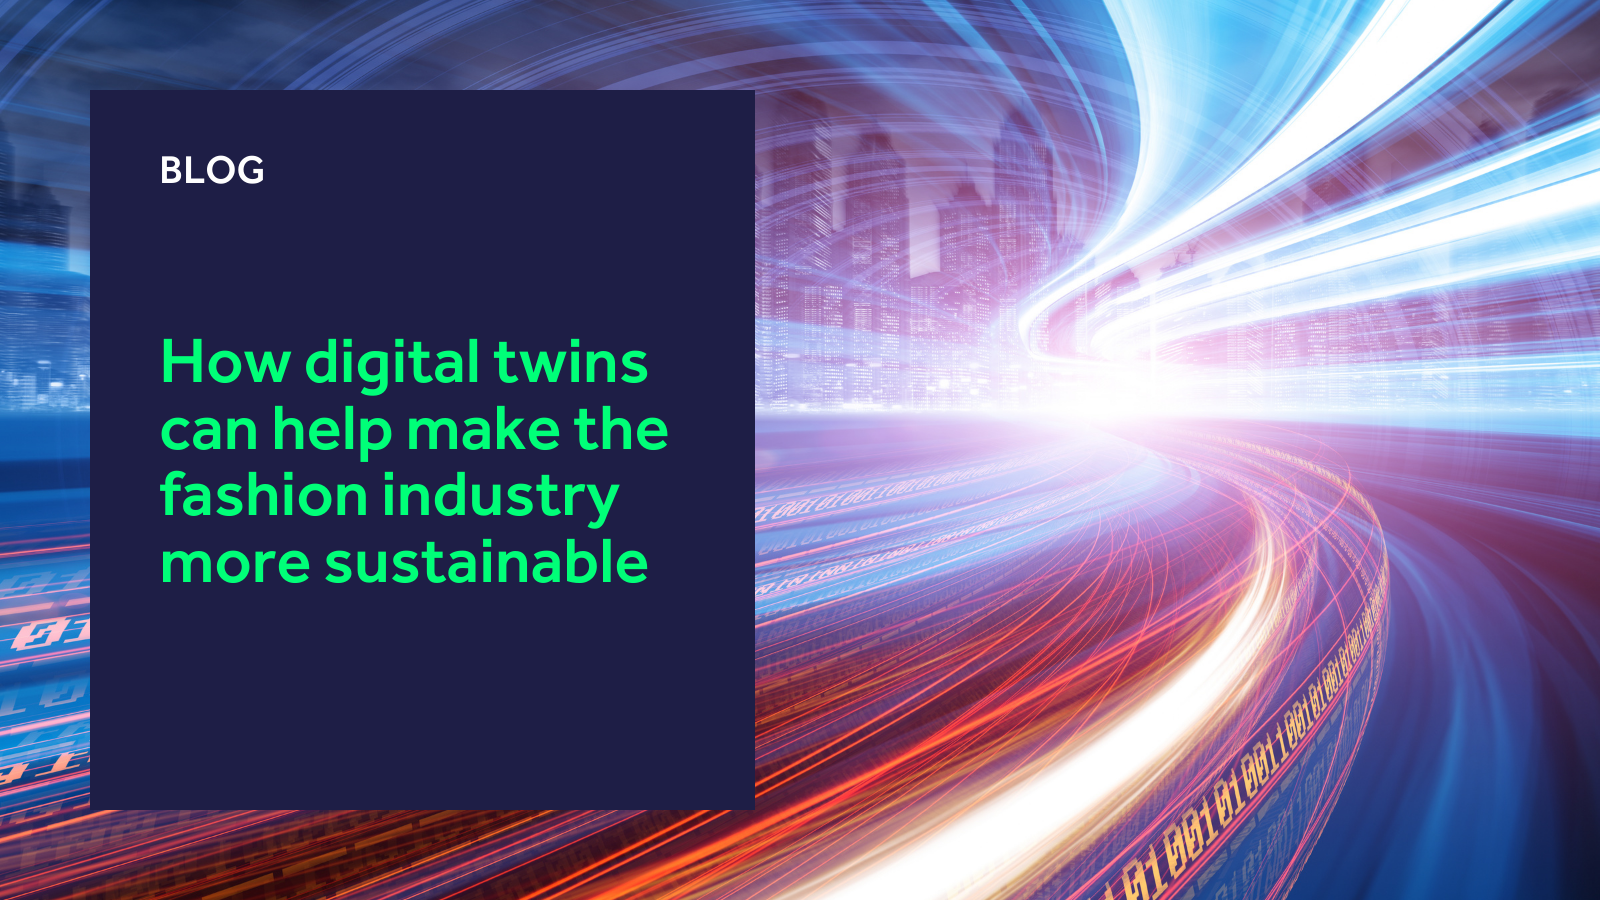 How digital twins can help make the fashion industry more sustainable